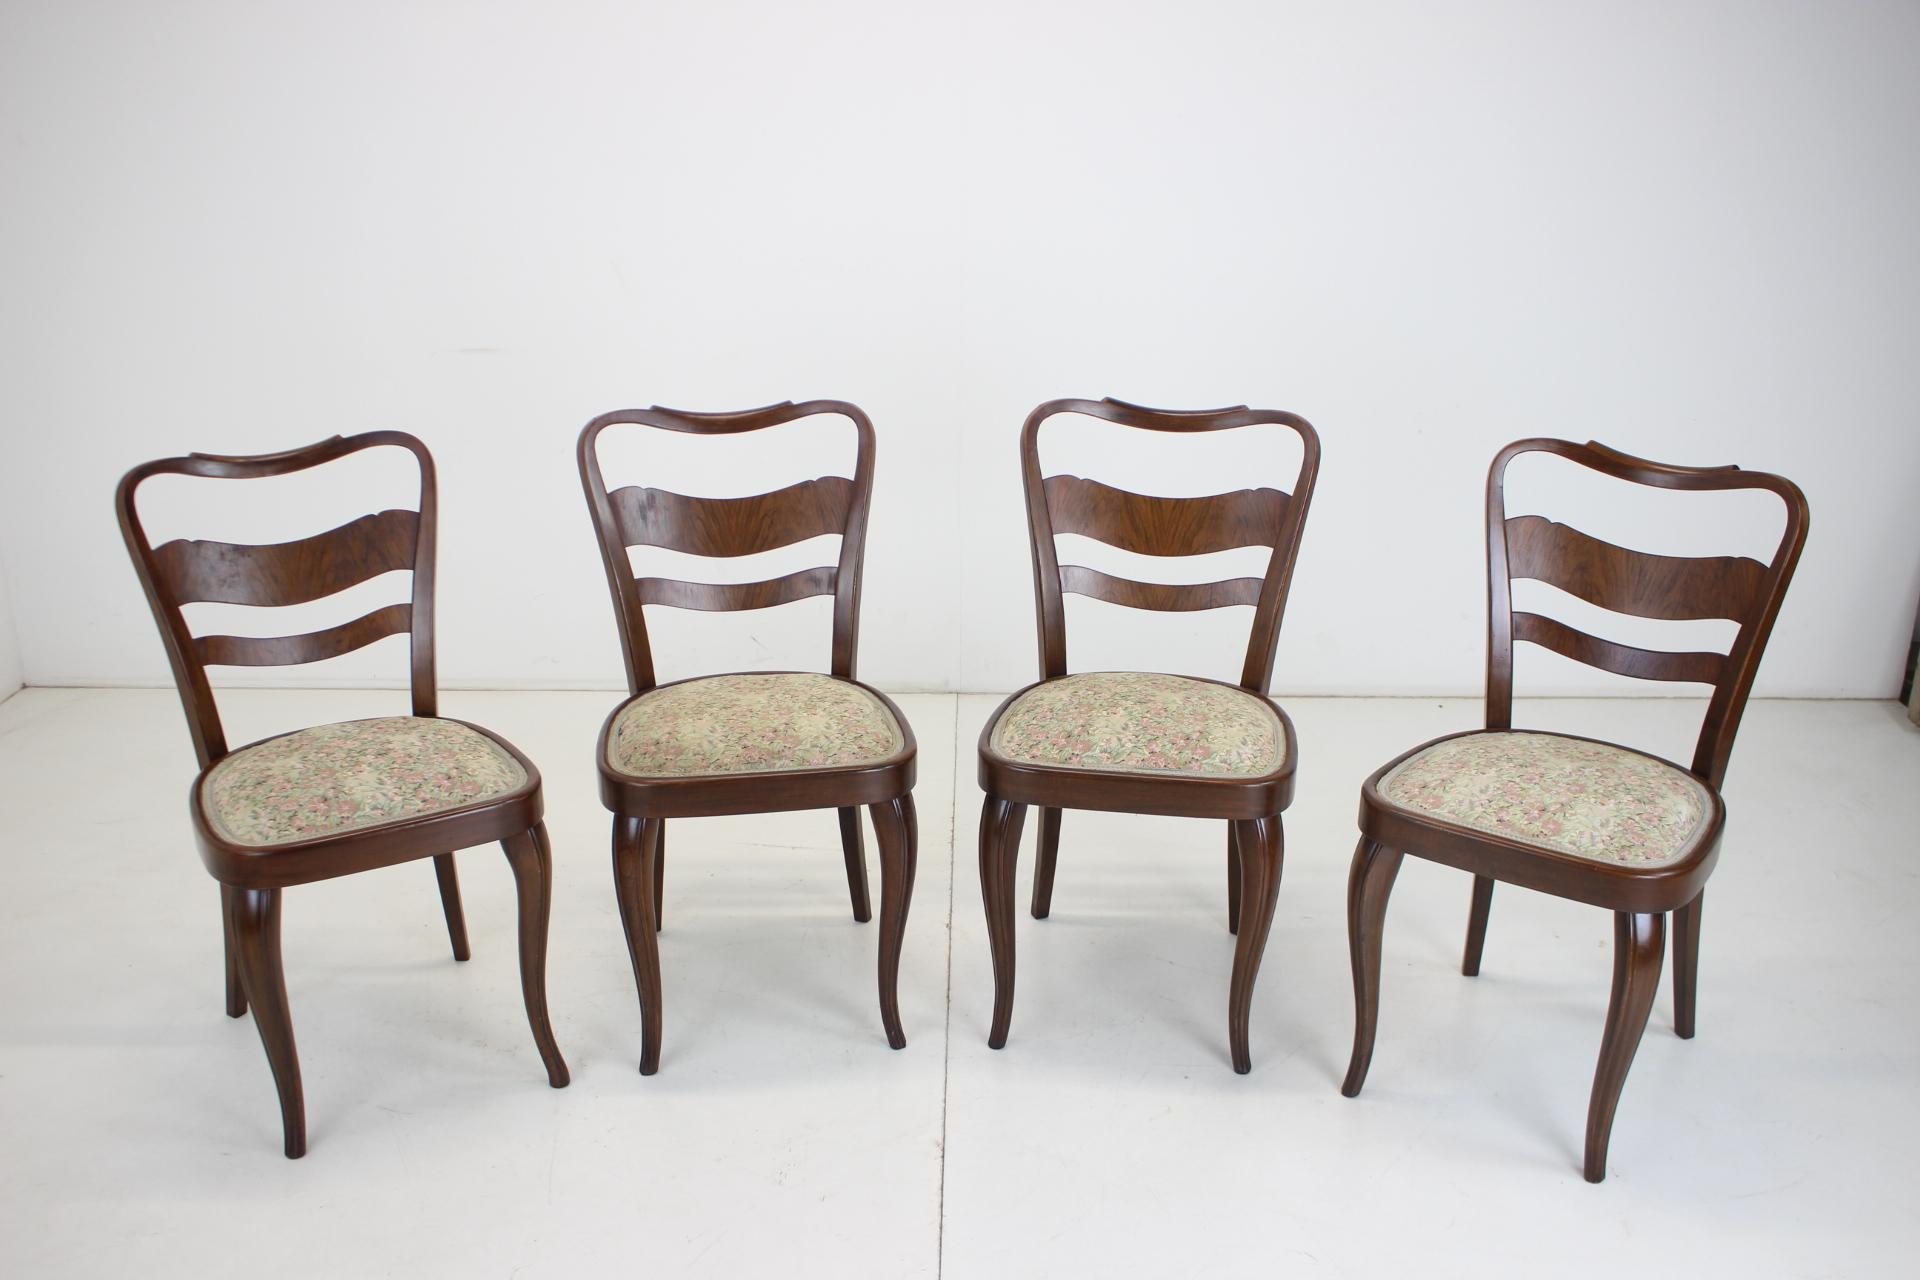 Art Deco 1940s Set of 4 Dining Chairs, Czechoslovakia For Sale